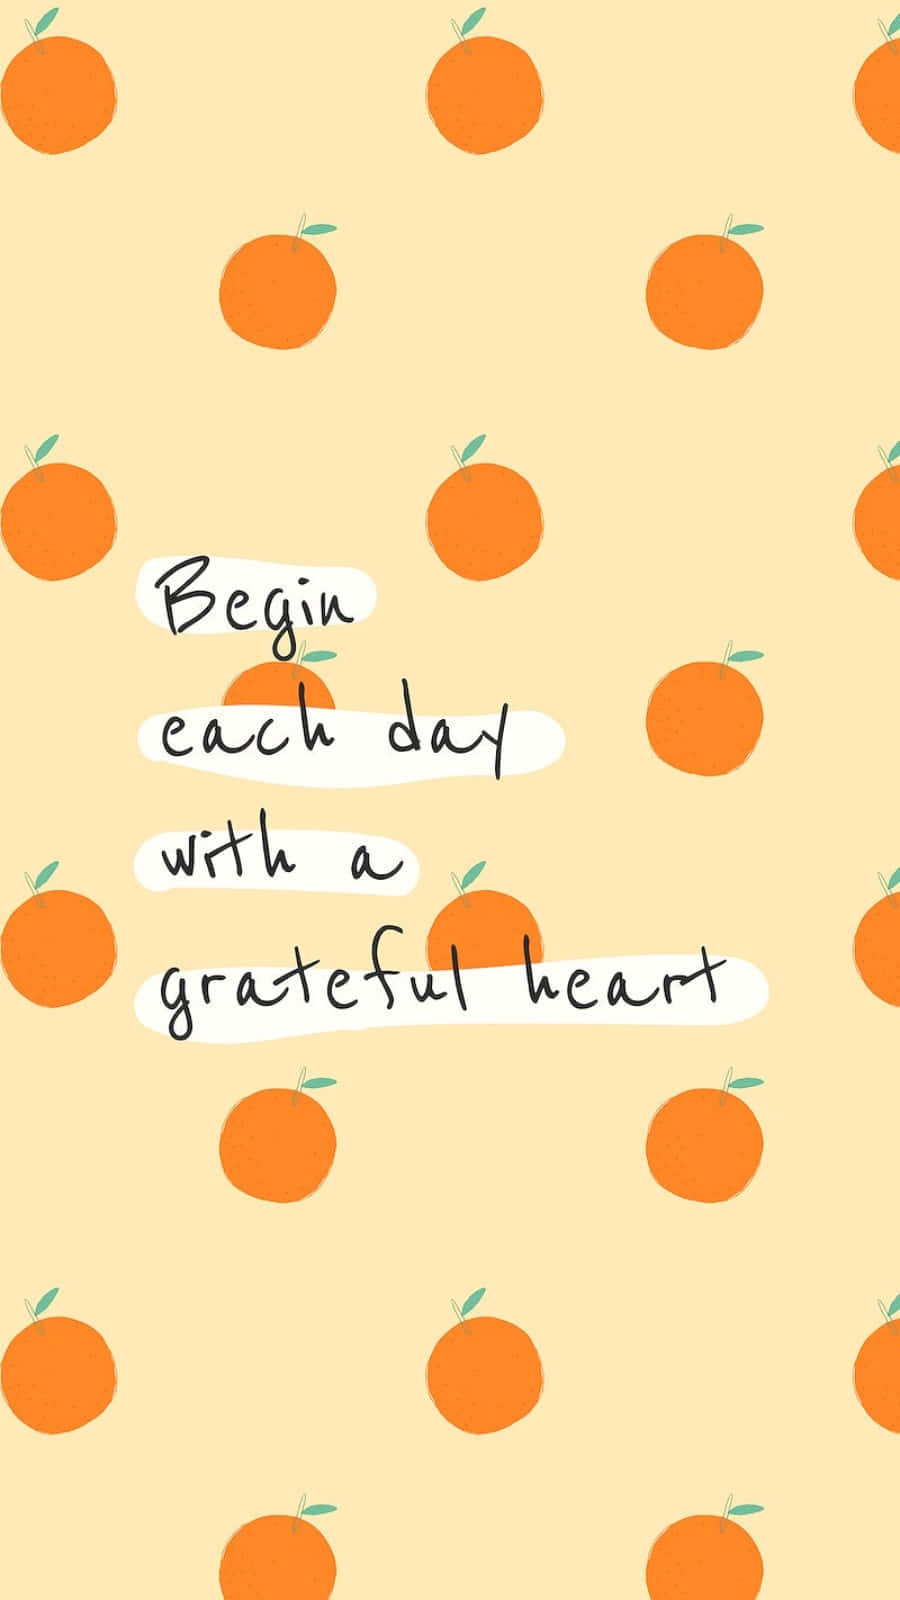 Brighten your day with a Cute Orange! Wallpaper